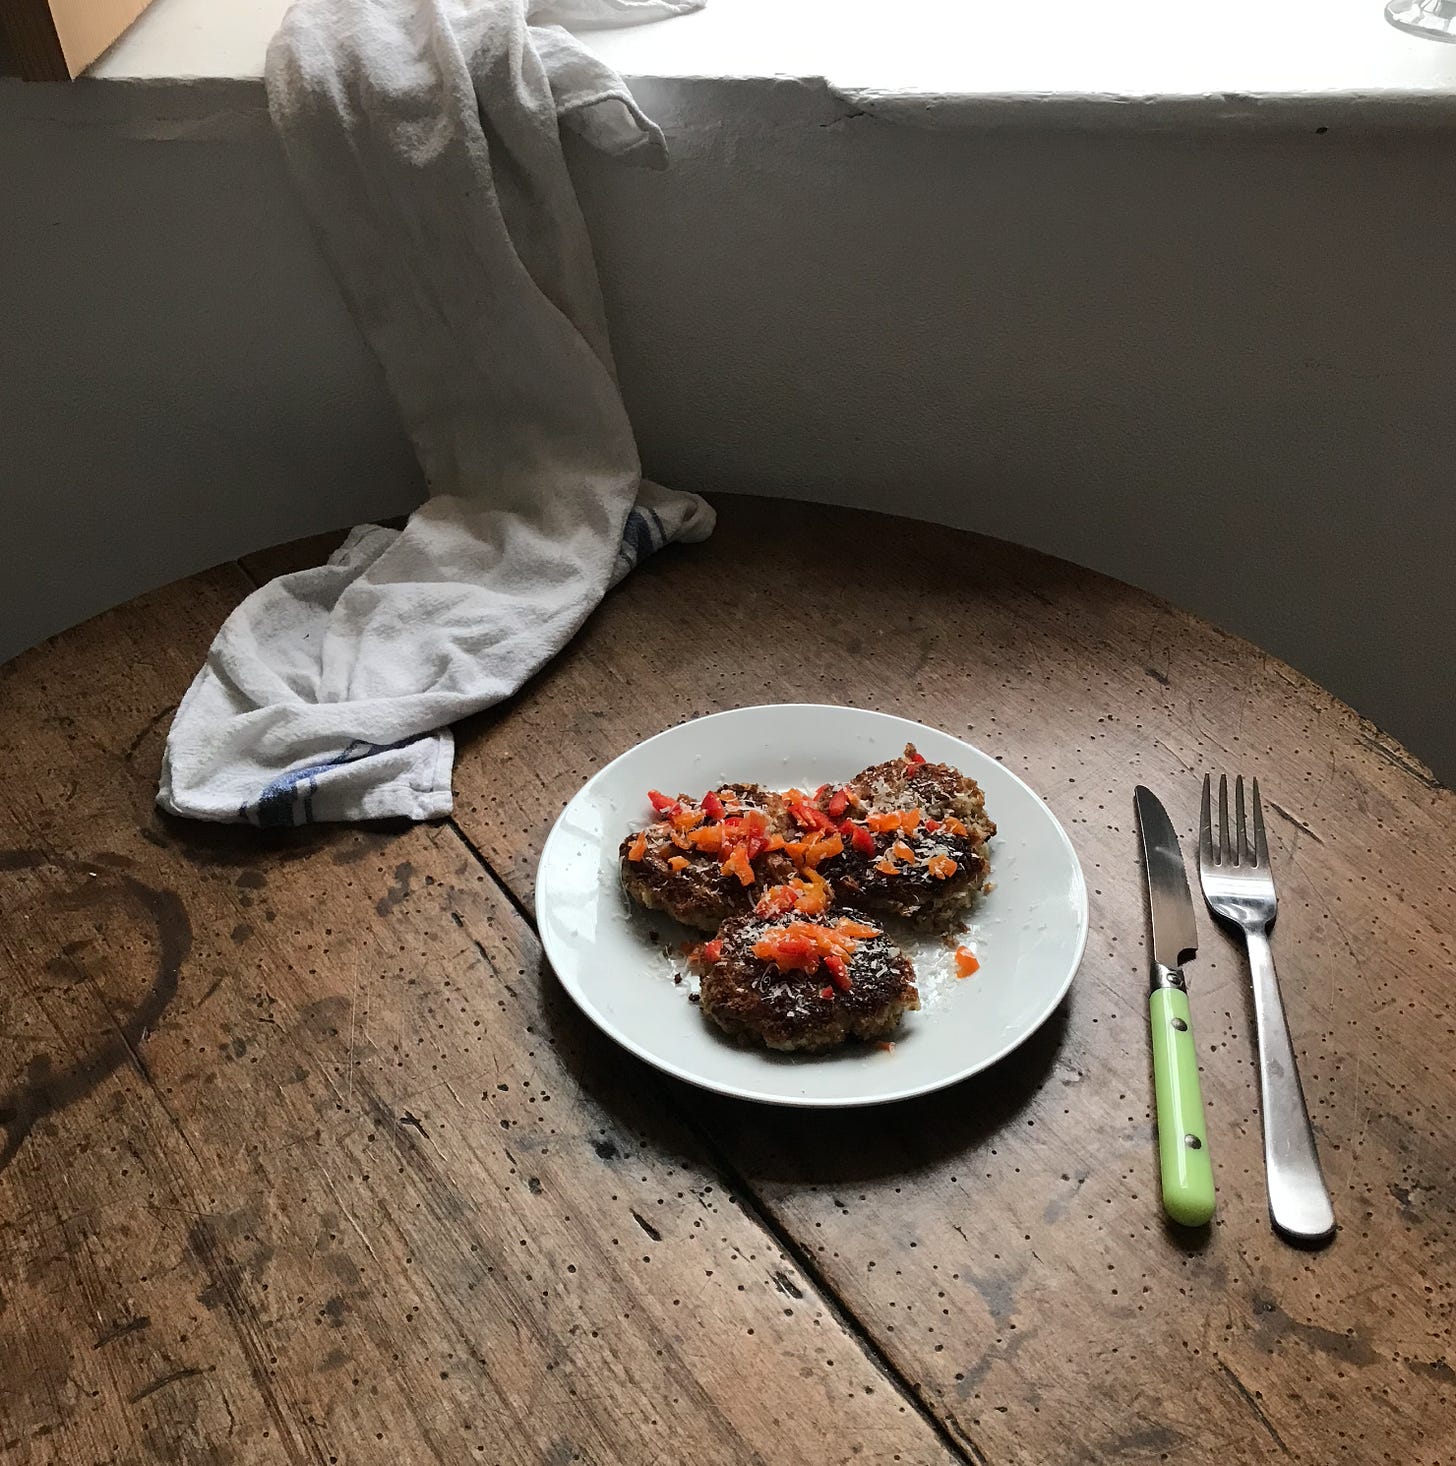 A white plate with three rough rounds, topped with something red, peppers cubed, and white gratings of parmesan cheese. To the side of the plate is a metal knife and fork, the knife has a bright green plastic handle. The plate is on an antique wooden table, and a tea towel half sits, half drapes over the table, in the background. 